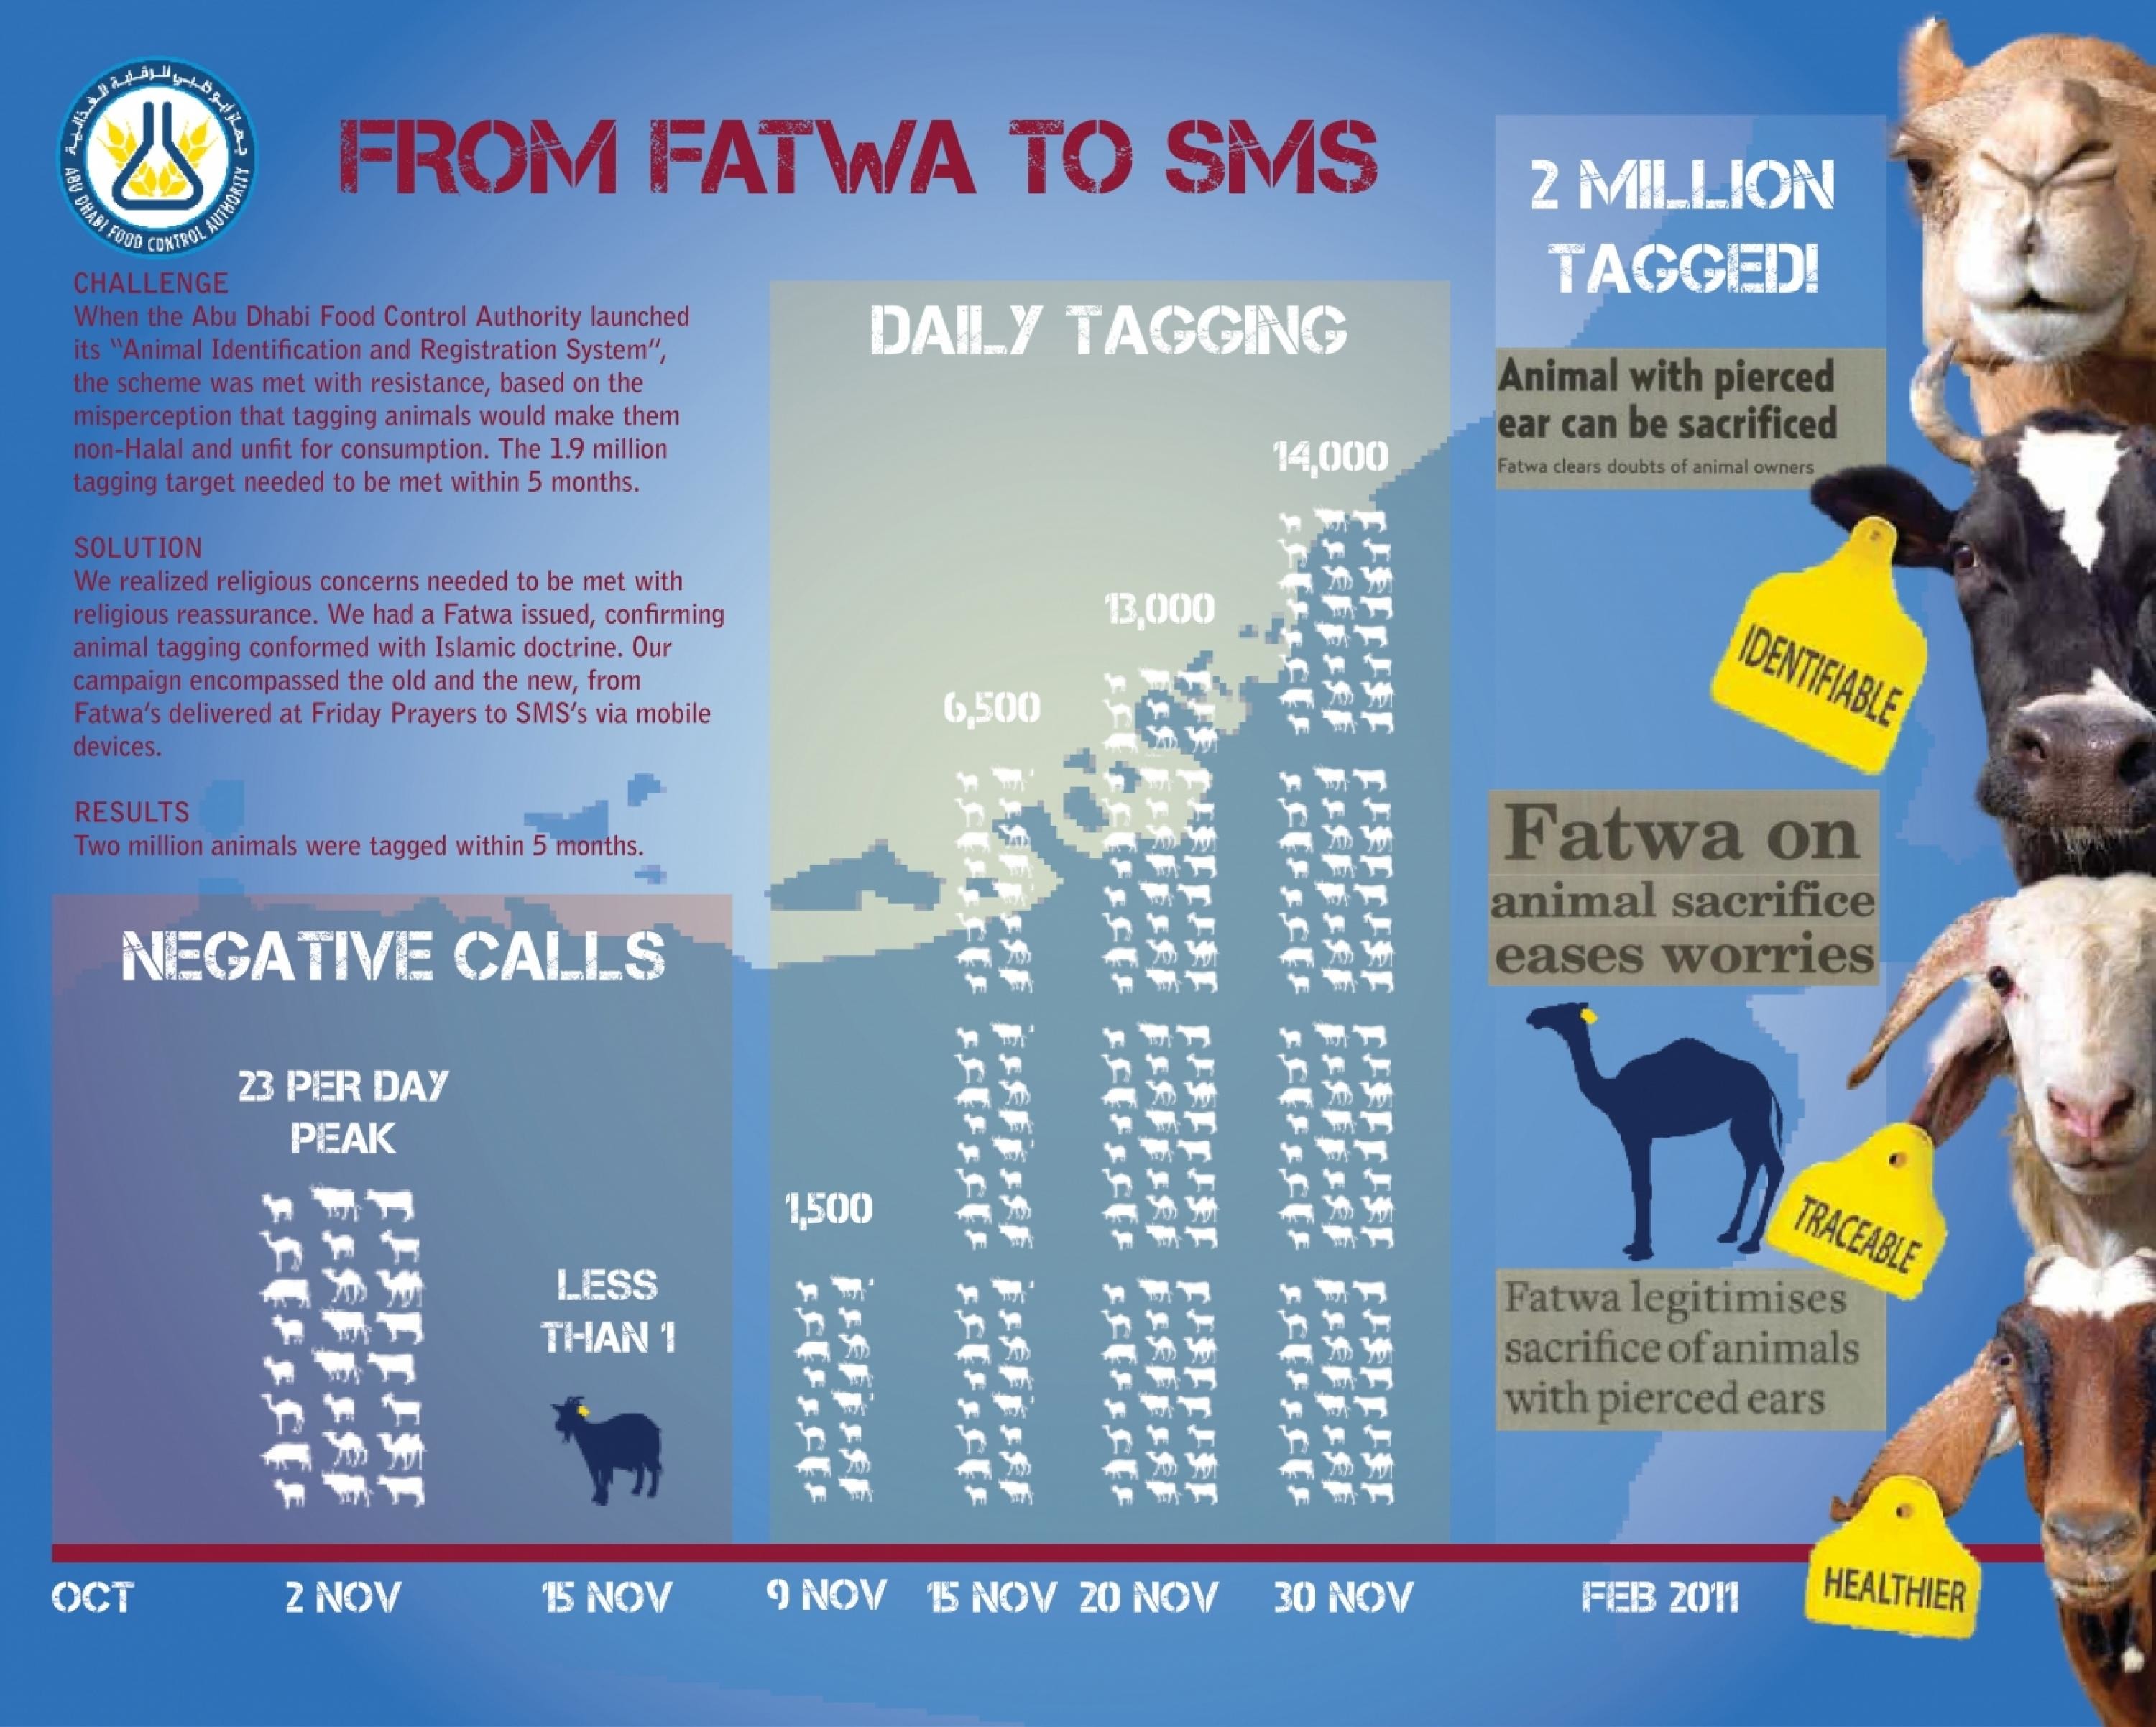 FROM FATWA TO SMS